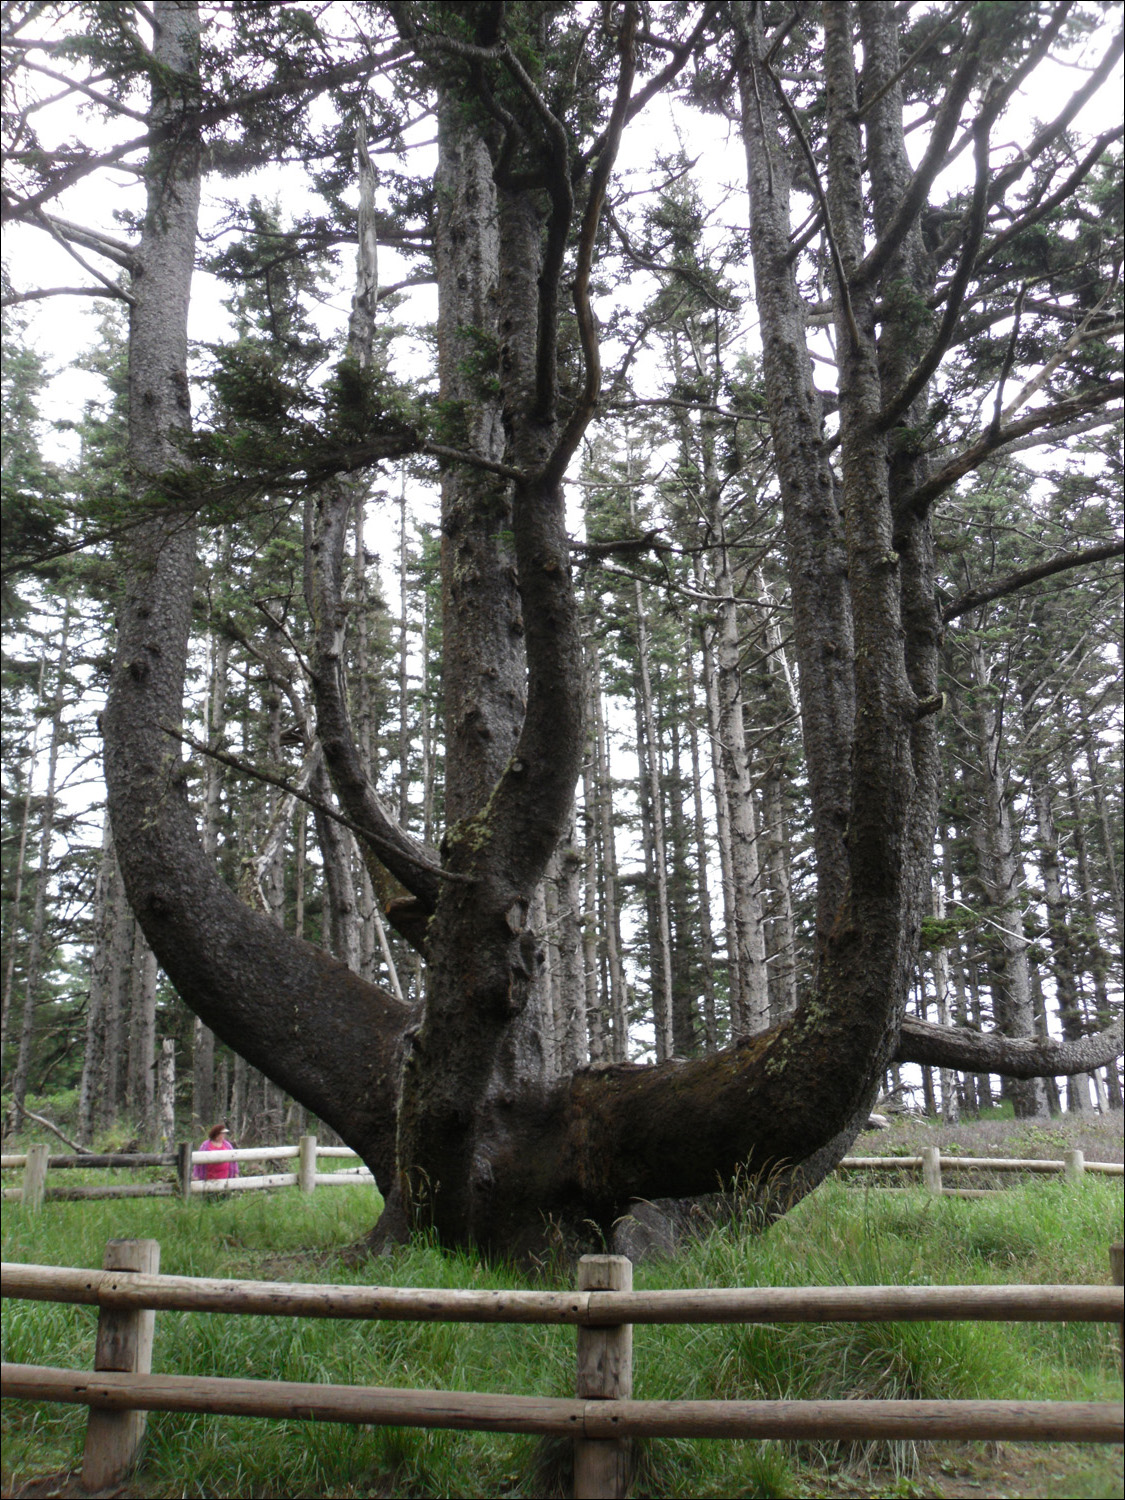 Tillamook, OR- Photos taken @Cape Mears State Park~ Octopus tree